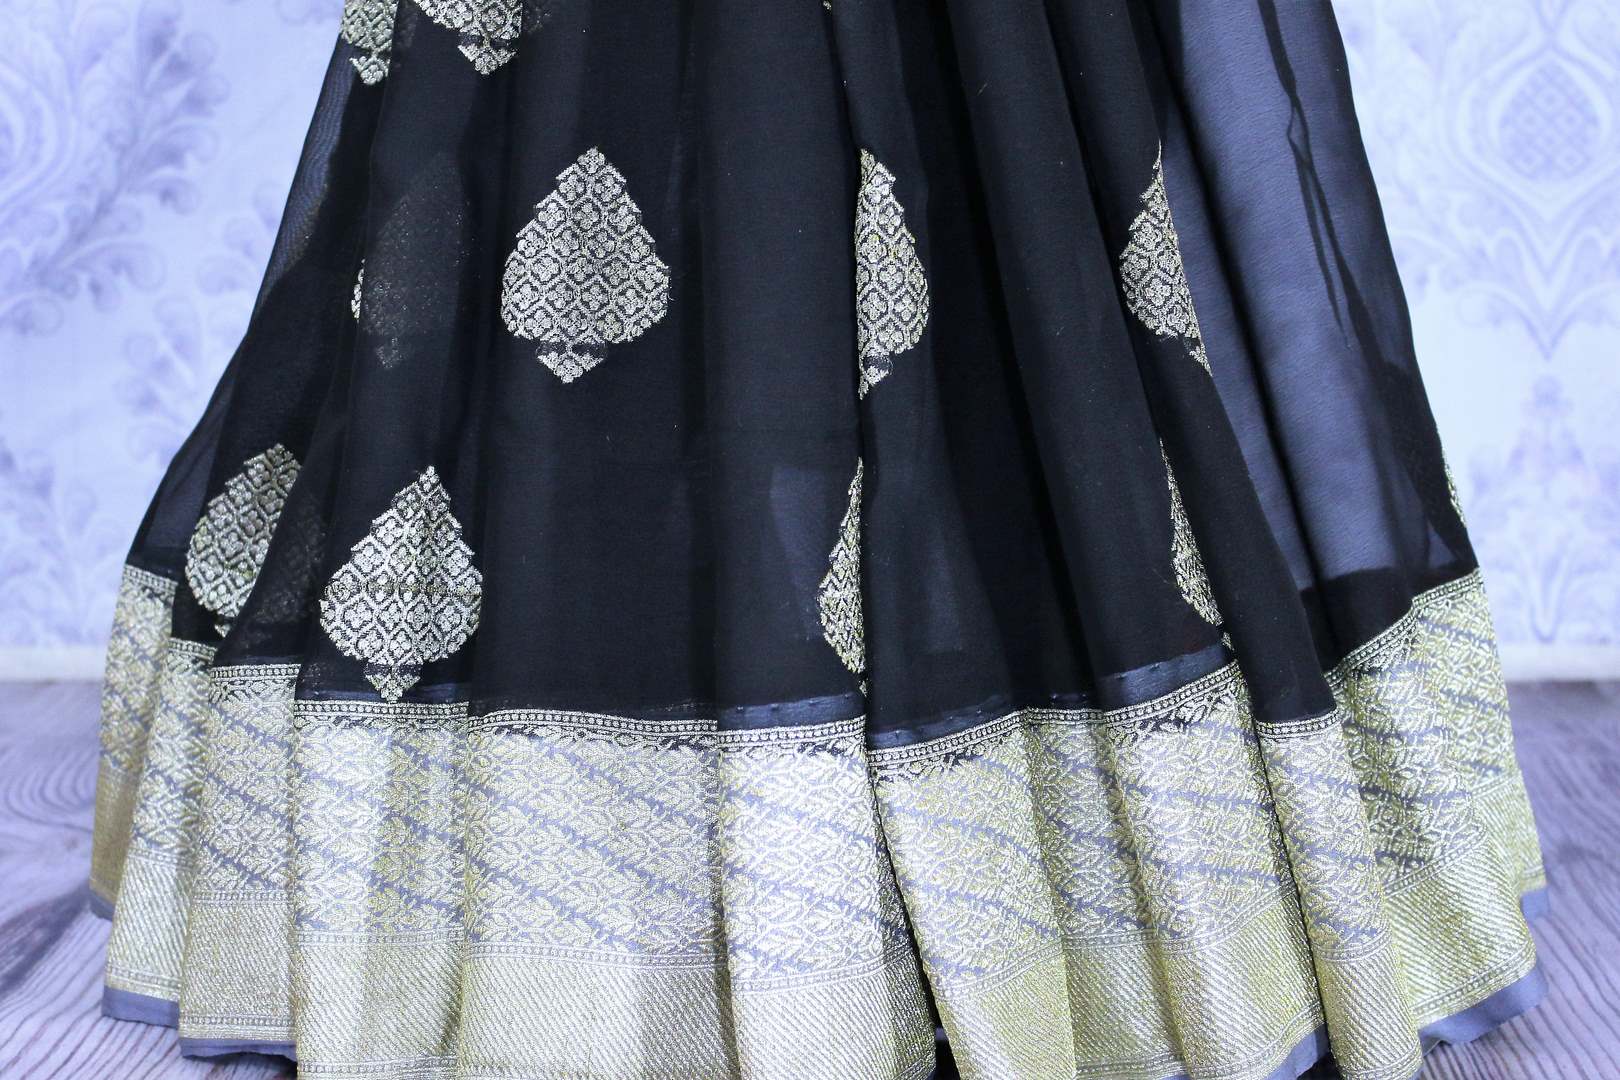 Black georgette Banarasi saree with silver buta for online shopping in USA. The traditional saree is contrasted with a light blue zari border which makes it so captivating. Select from an exquisite collection of traditional Indian Banarasi sarees, designer sarees at Pure Elegance clothing store or shop online.-pleats